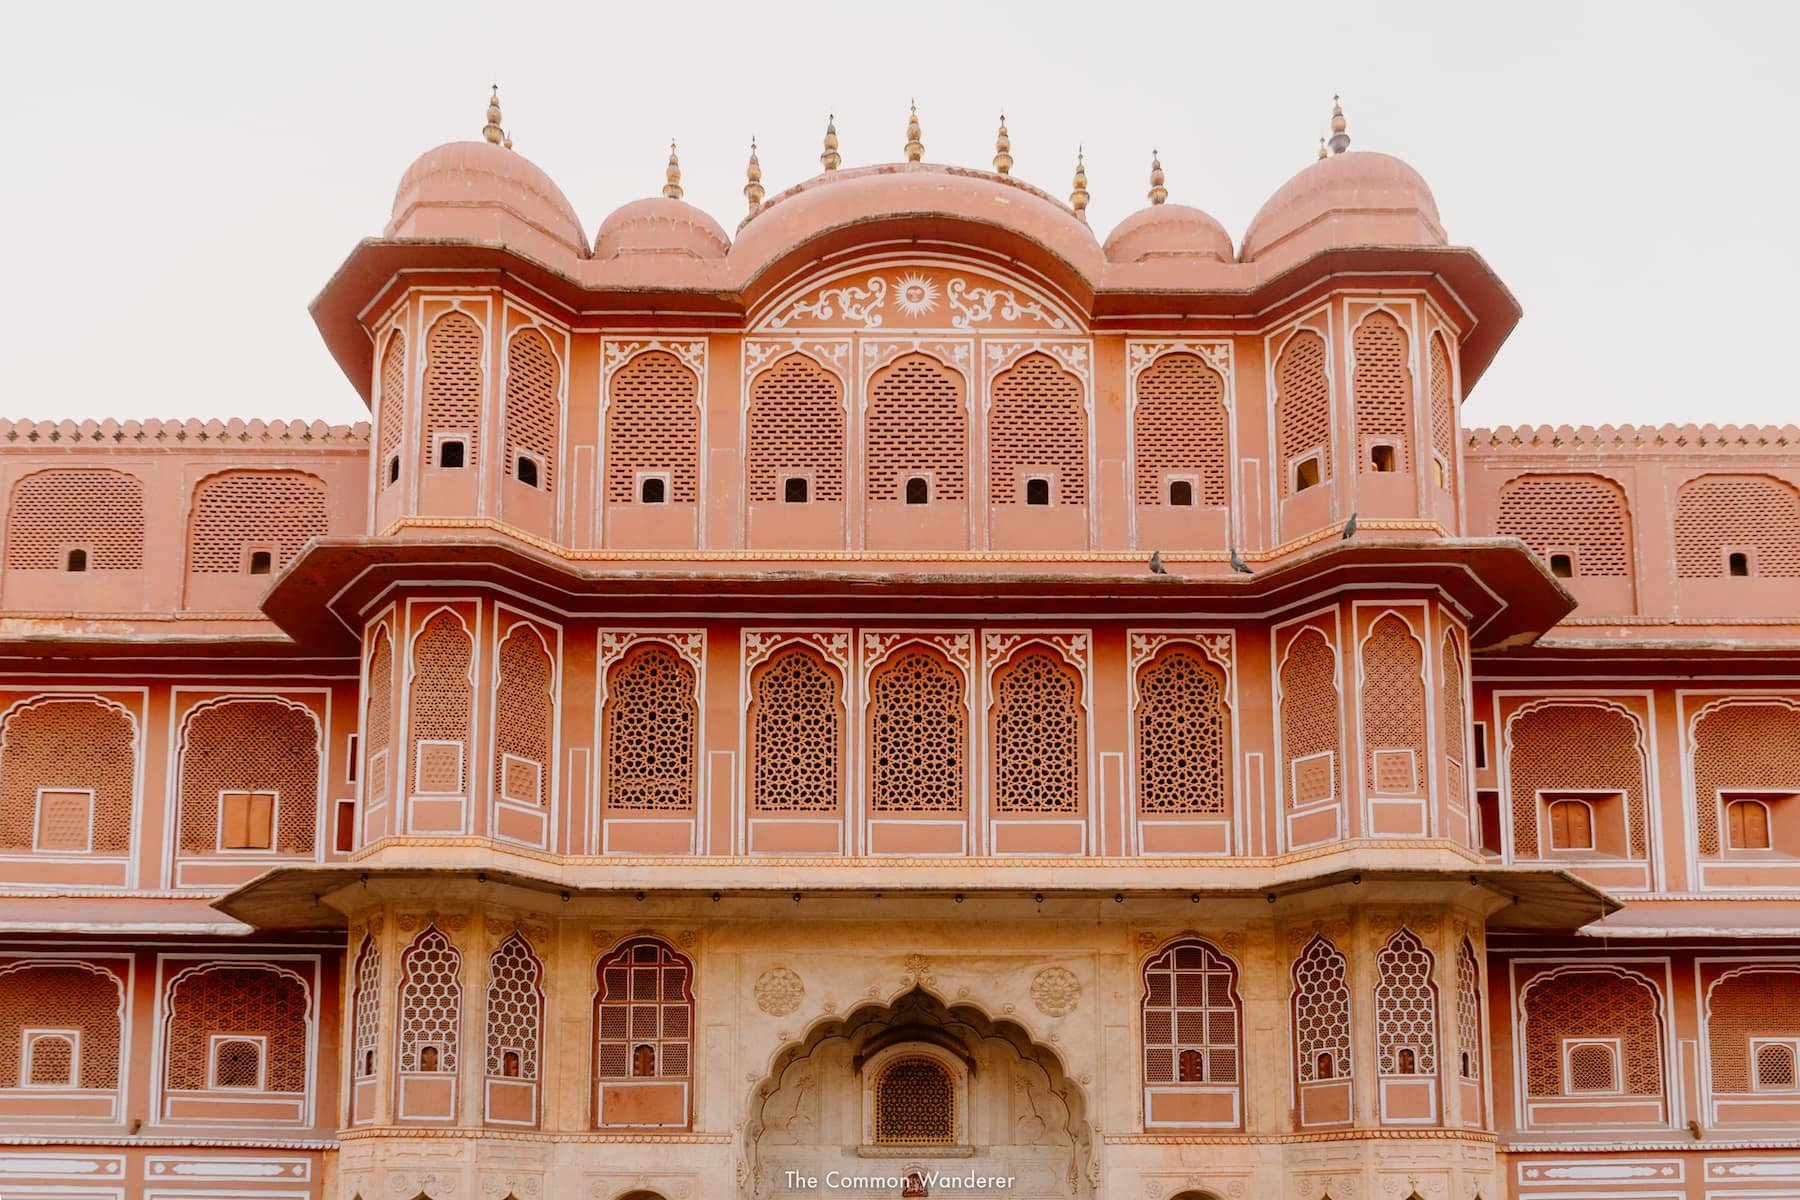 Does Jaipur still have a king?